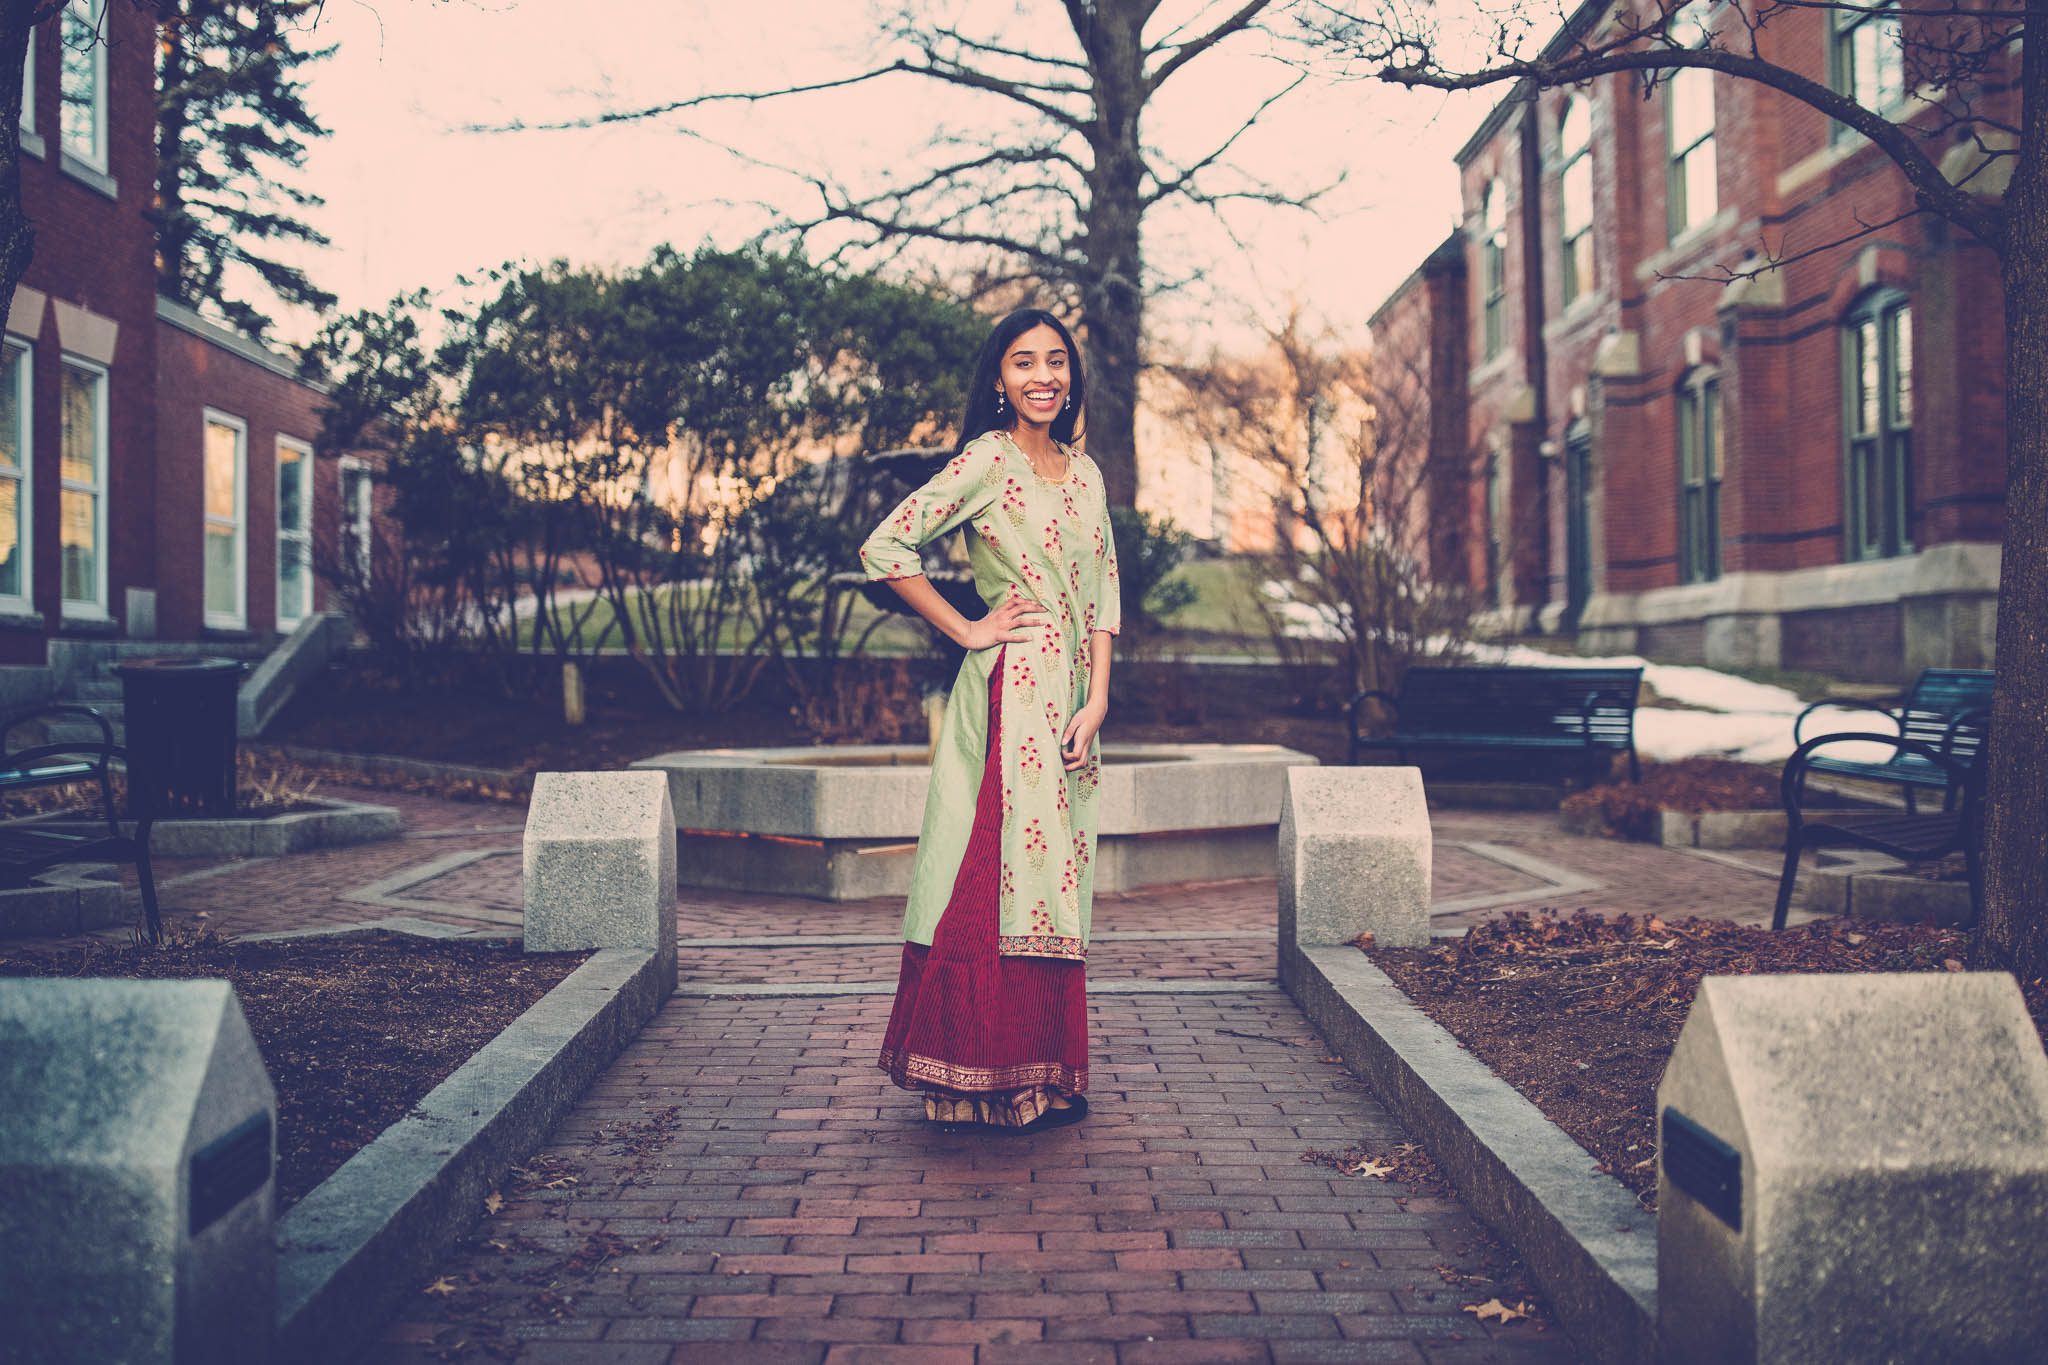 High school senior portrait of a young Indian girl wearing traditional clothing in a courtyard with a fountain and brick sidewalks in Massachusetts photographed by Sean Wytrwal of J&S Photography